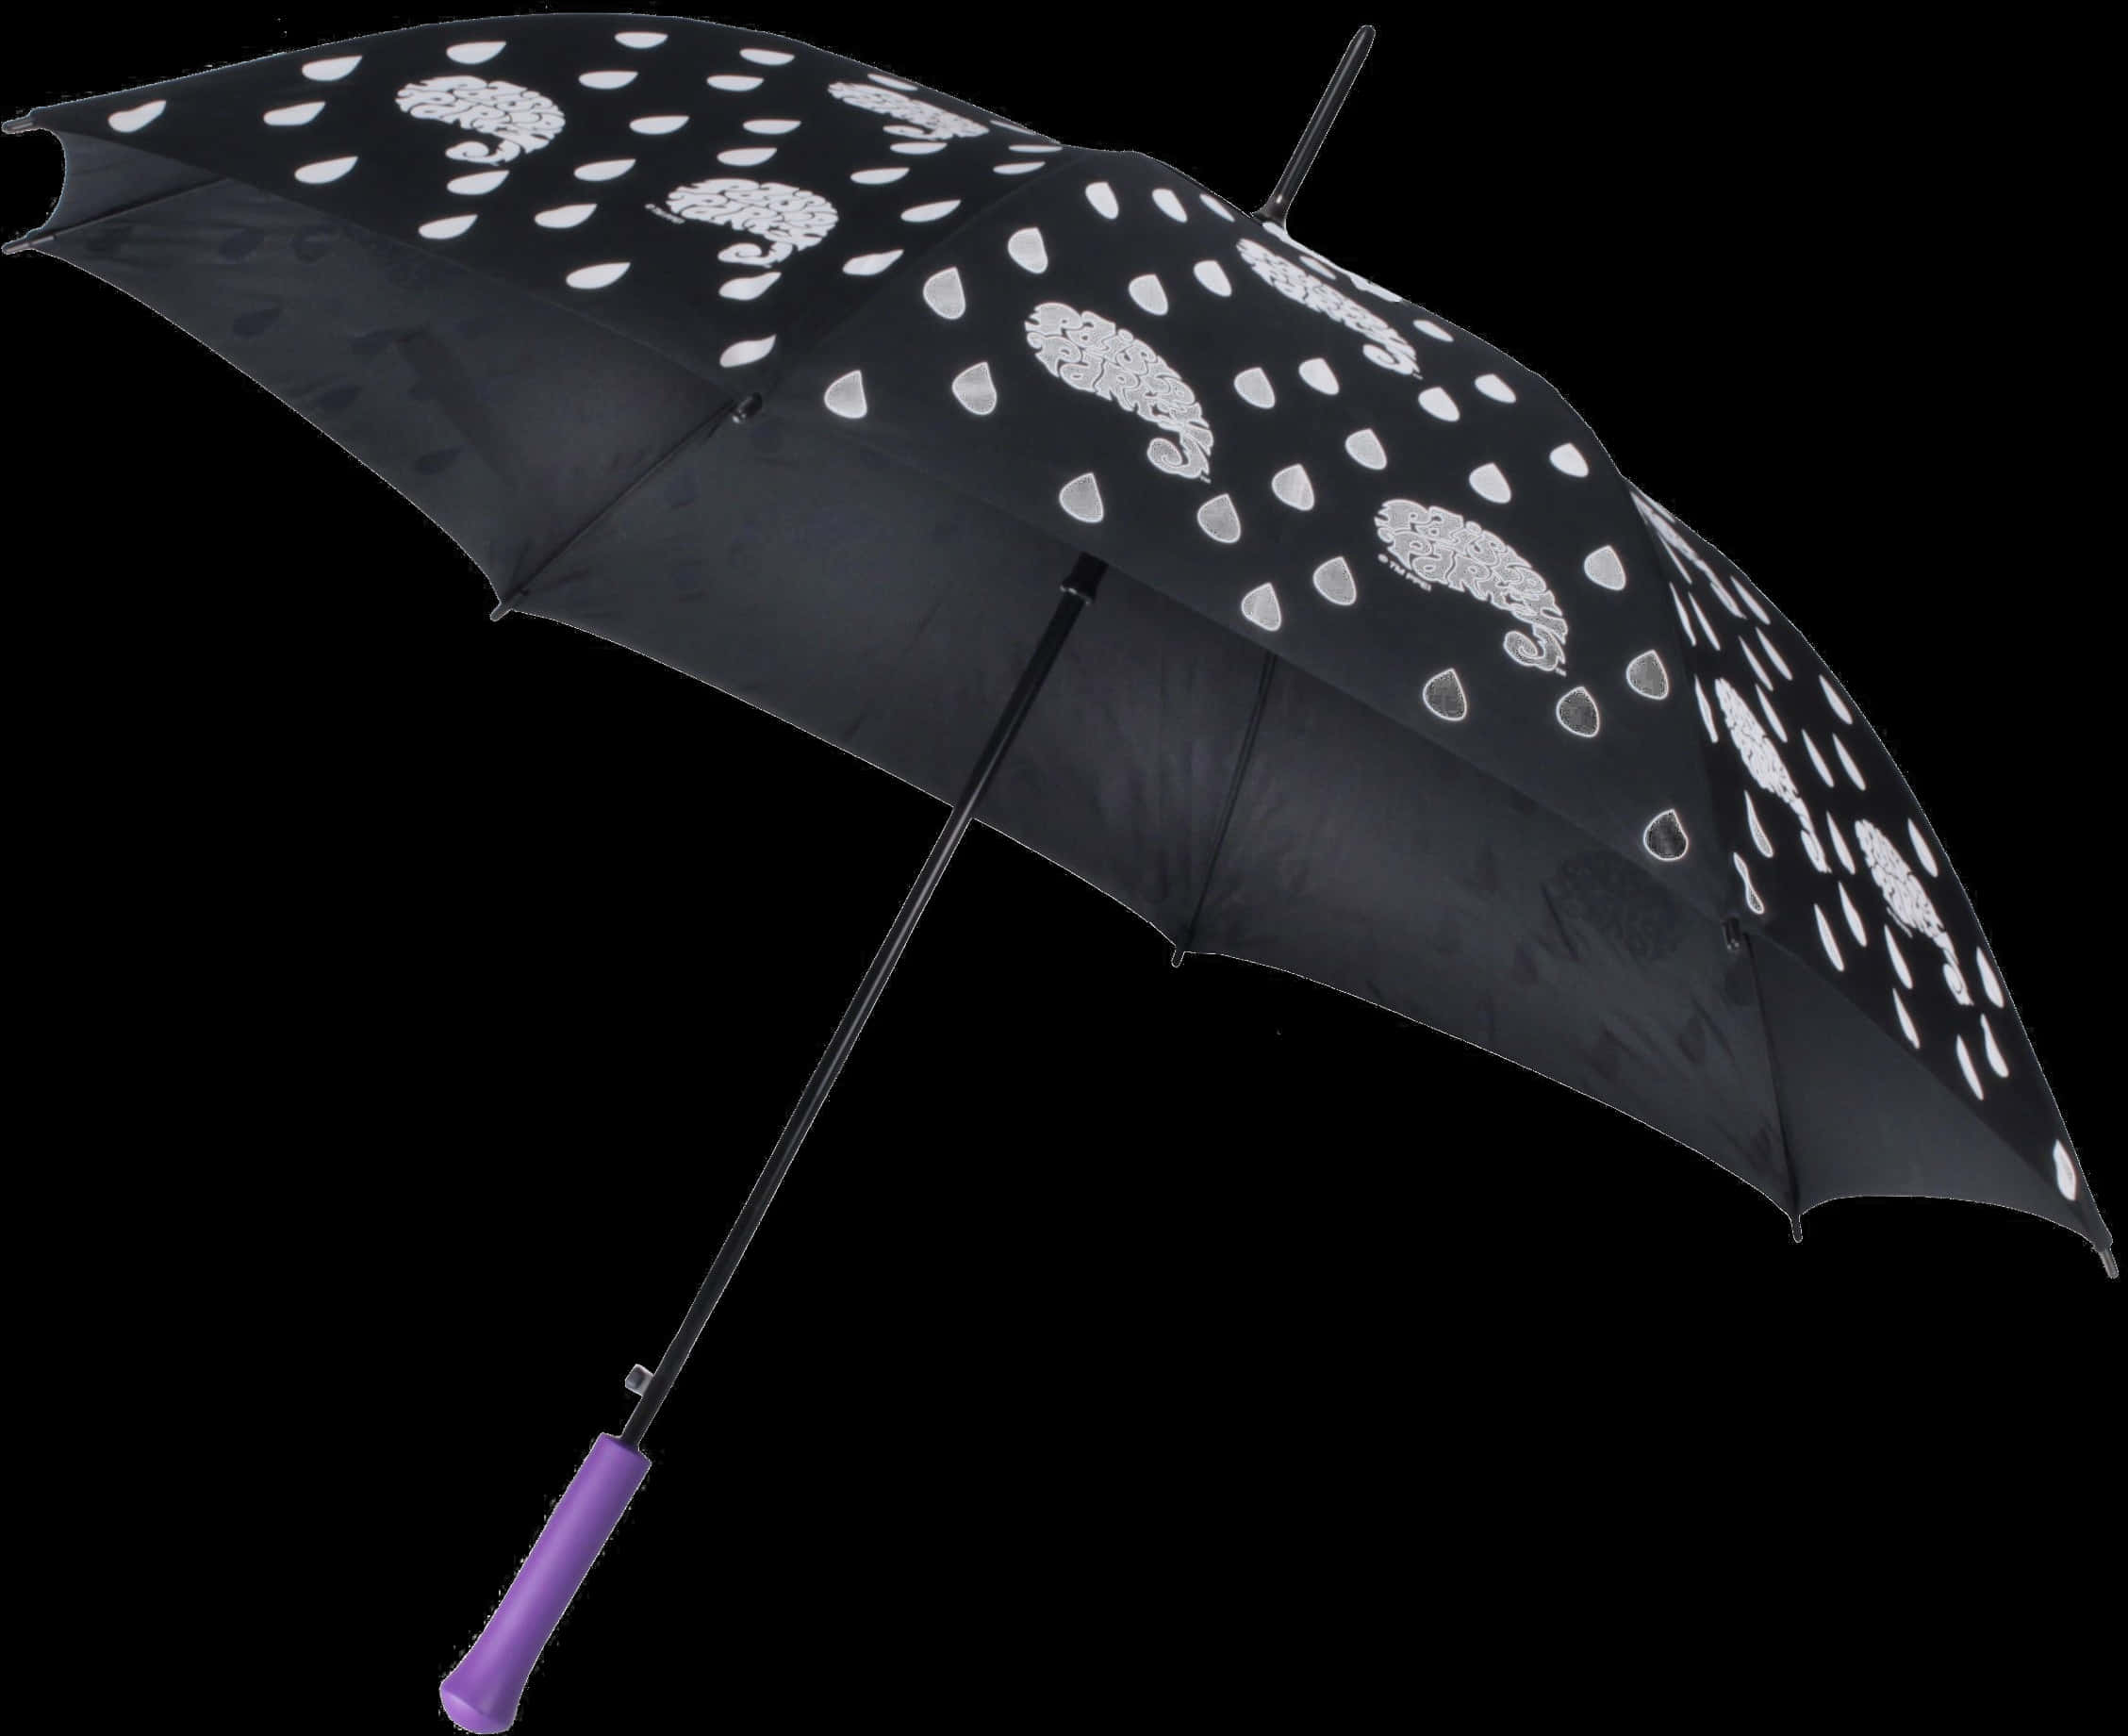 A Black Umbrella With White Dots On It